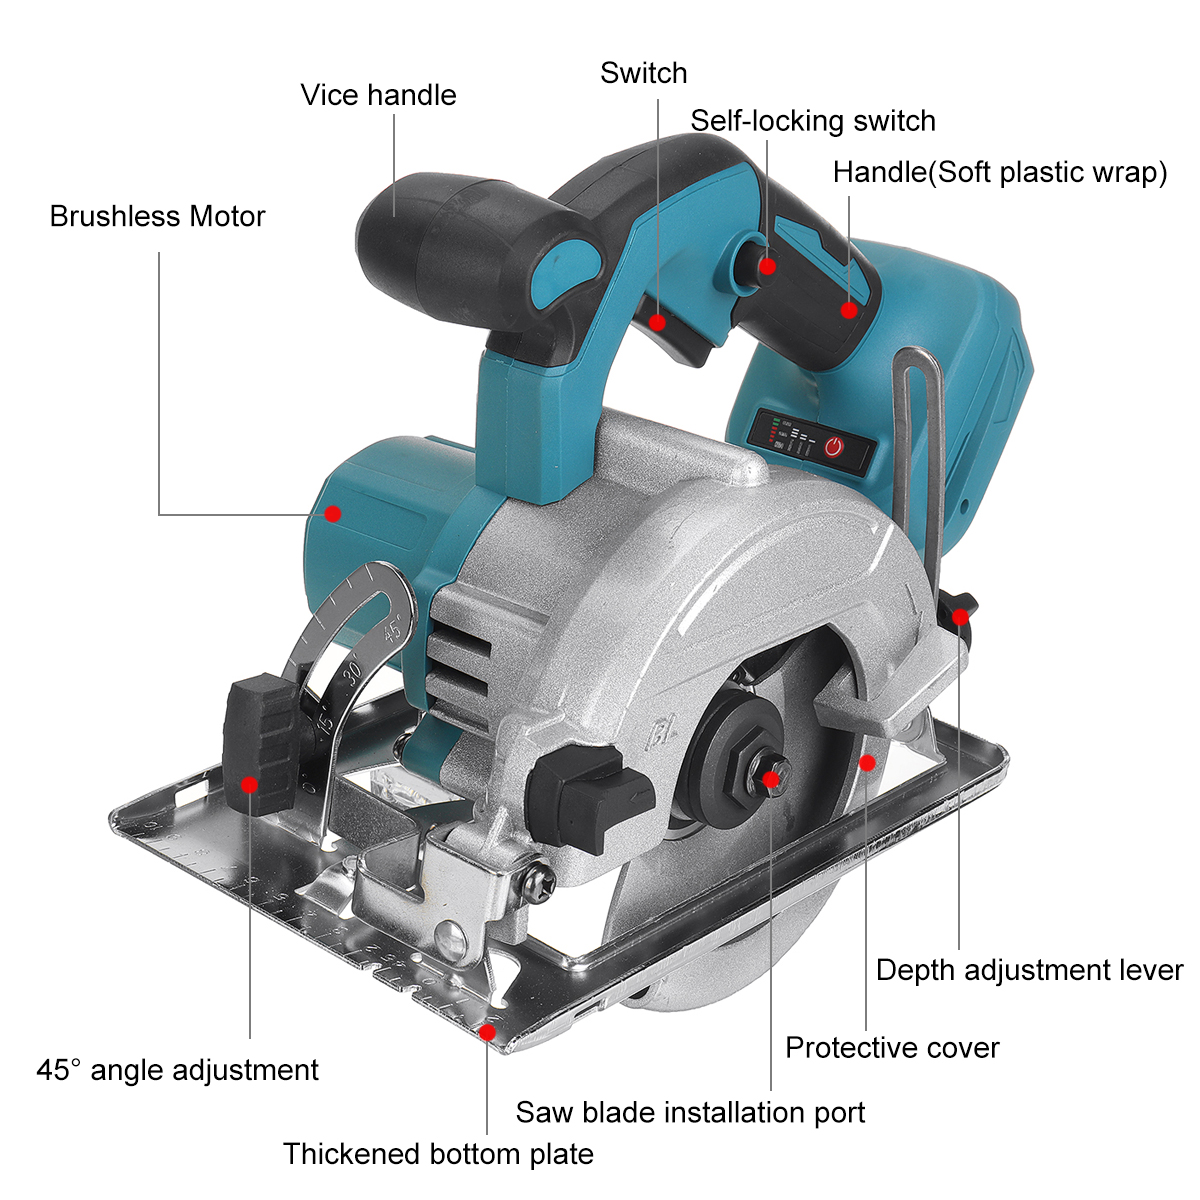 125mm-Wireless-Brushless-Electric-Circular-Saw-Rechargeable-Metal-Wood-Plastic-Stone-Cutting-Tool-fo-1880978-3